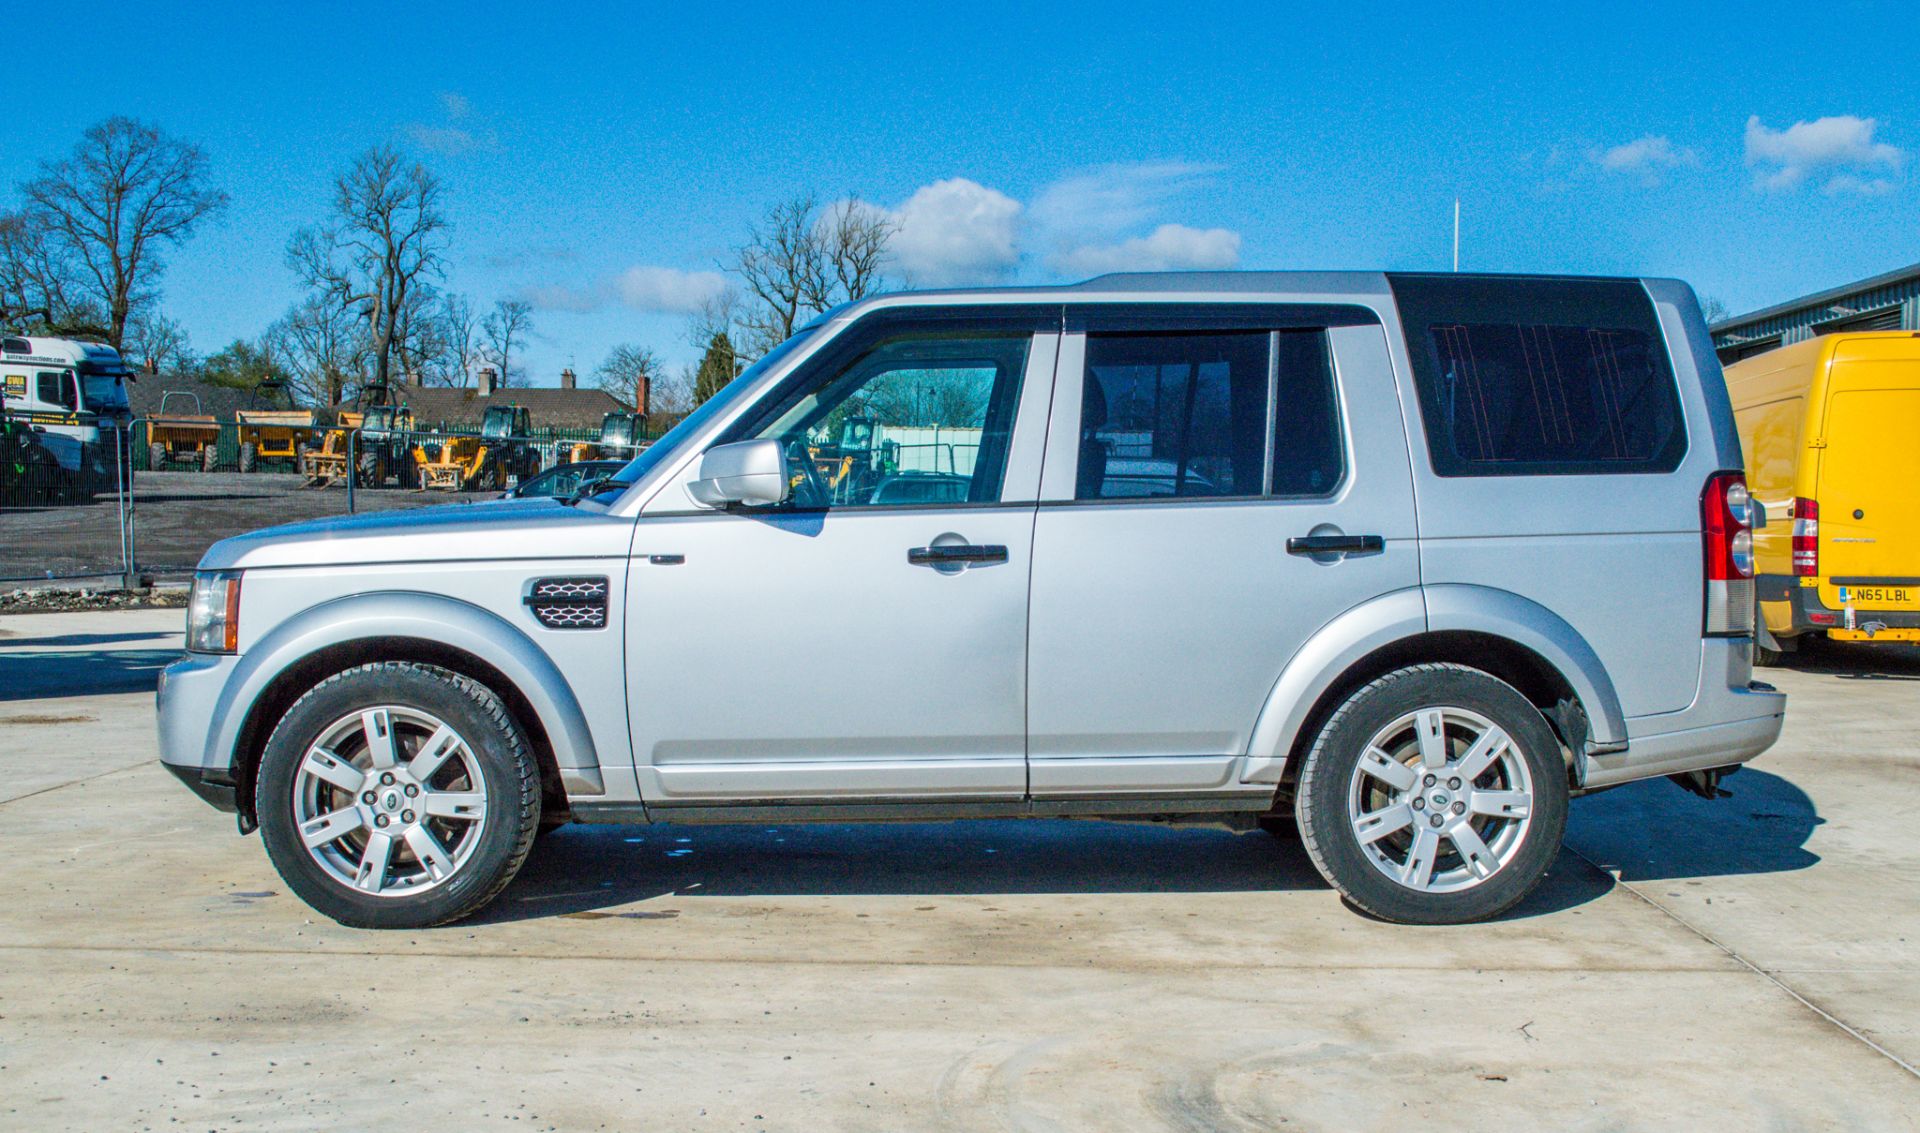 Land Rover Discovery 4 GS SDV6 3.0 diesel automatic estate car - Image 8 of 30